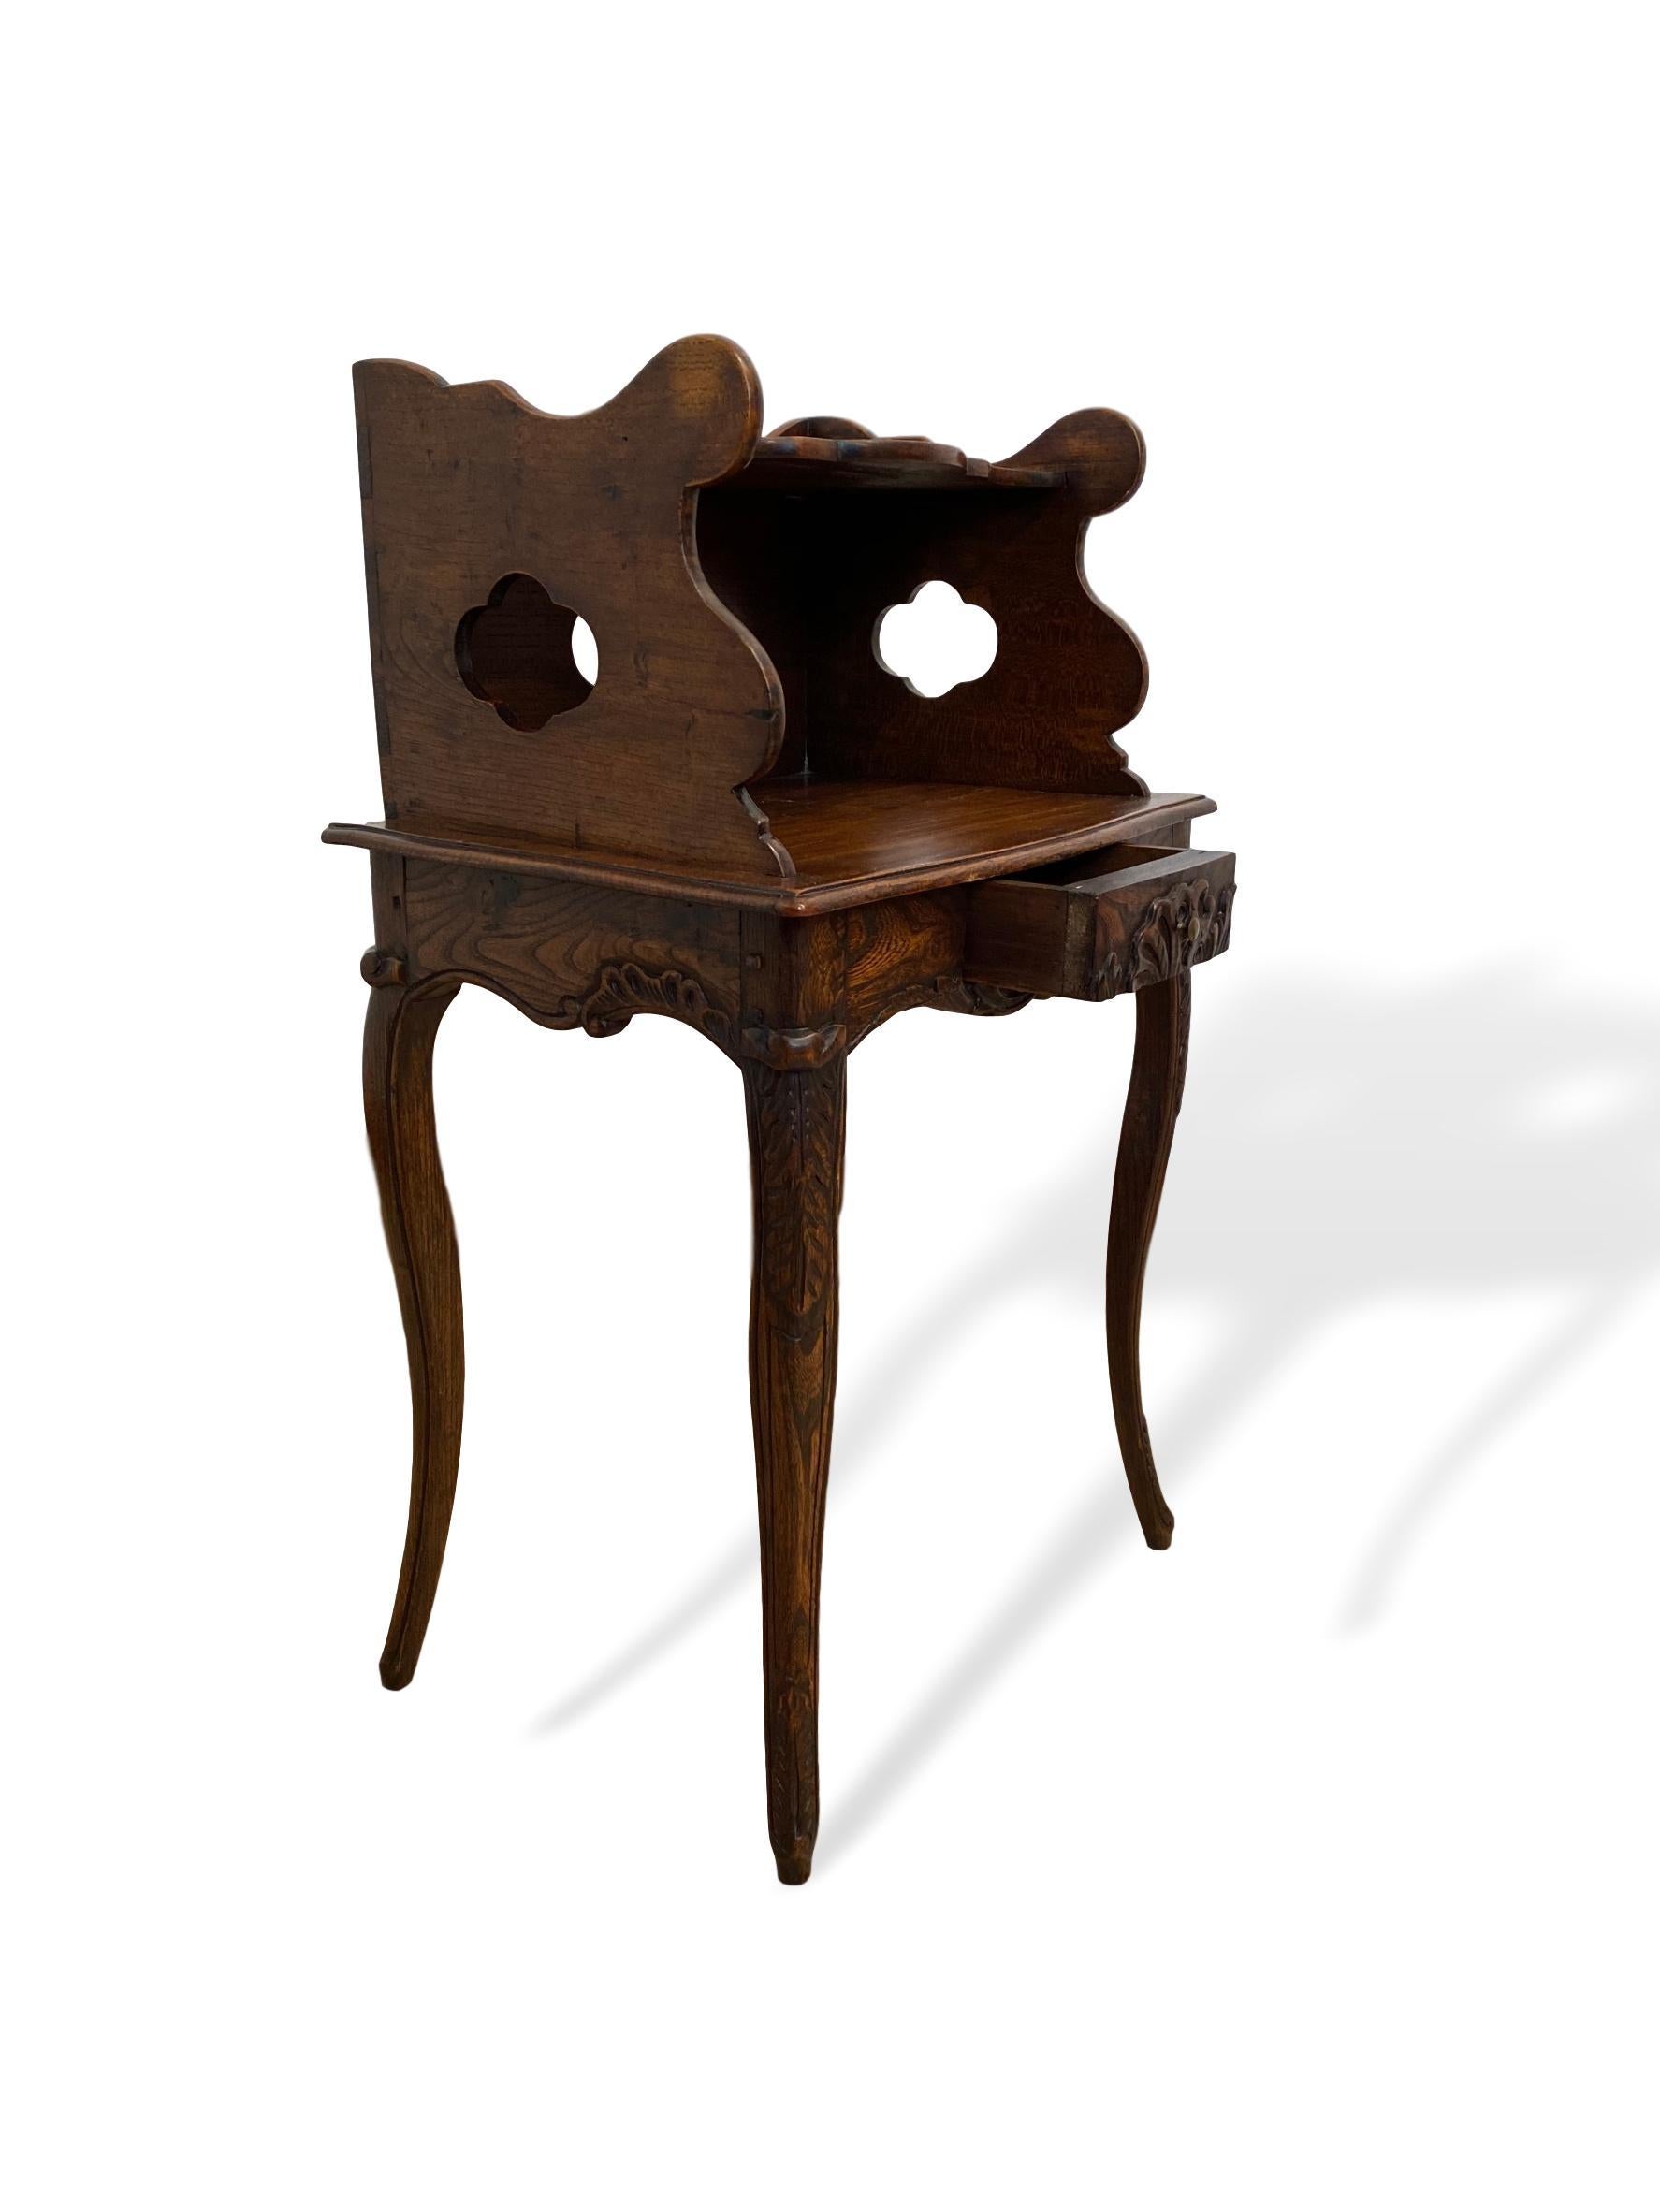 Highly figured elmwood side table with gallery/shelf, pierced quatrefoils, French, circa 1870, with a single drawer, hand carved with a freestyle shell to the drawer and apron, with hand carved acanthus leaf decoration to the shaped cabriole legs.